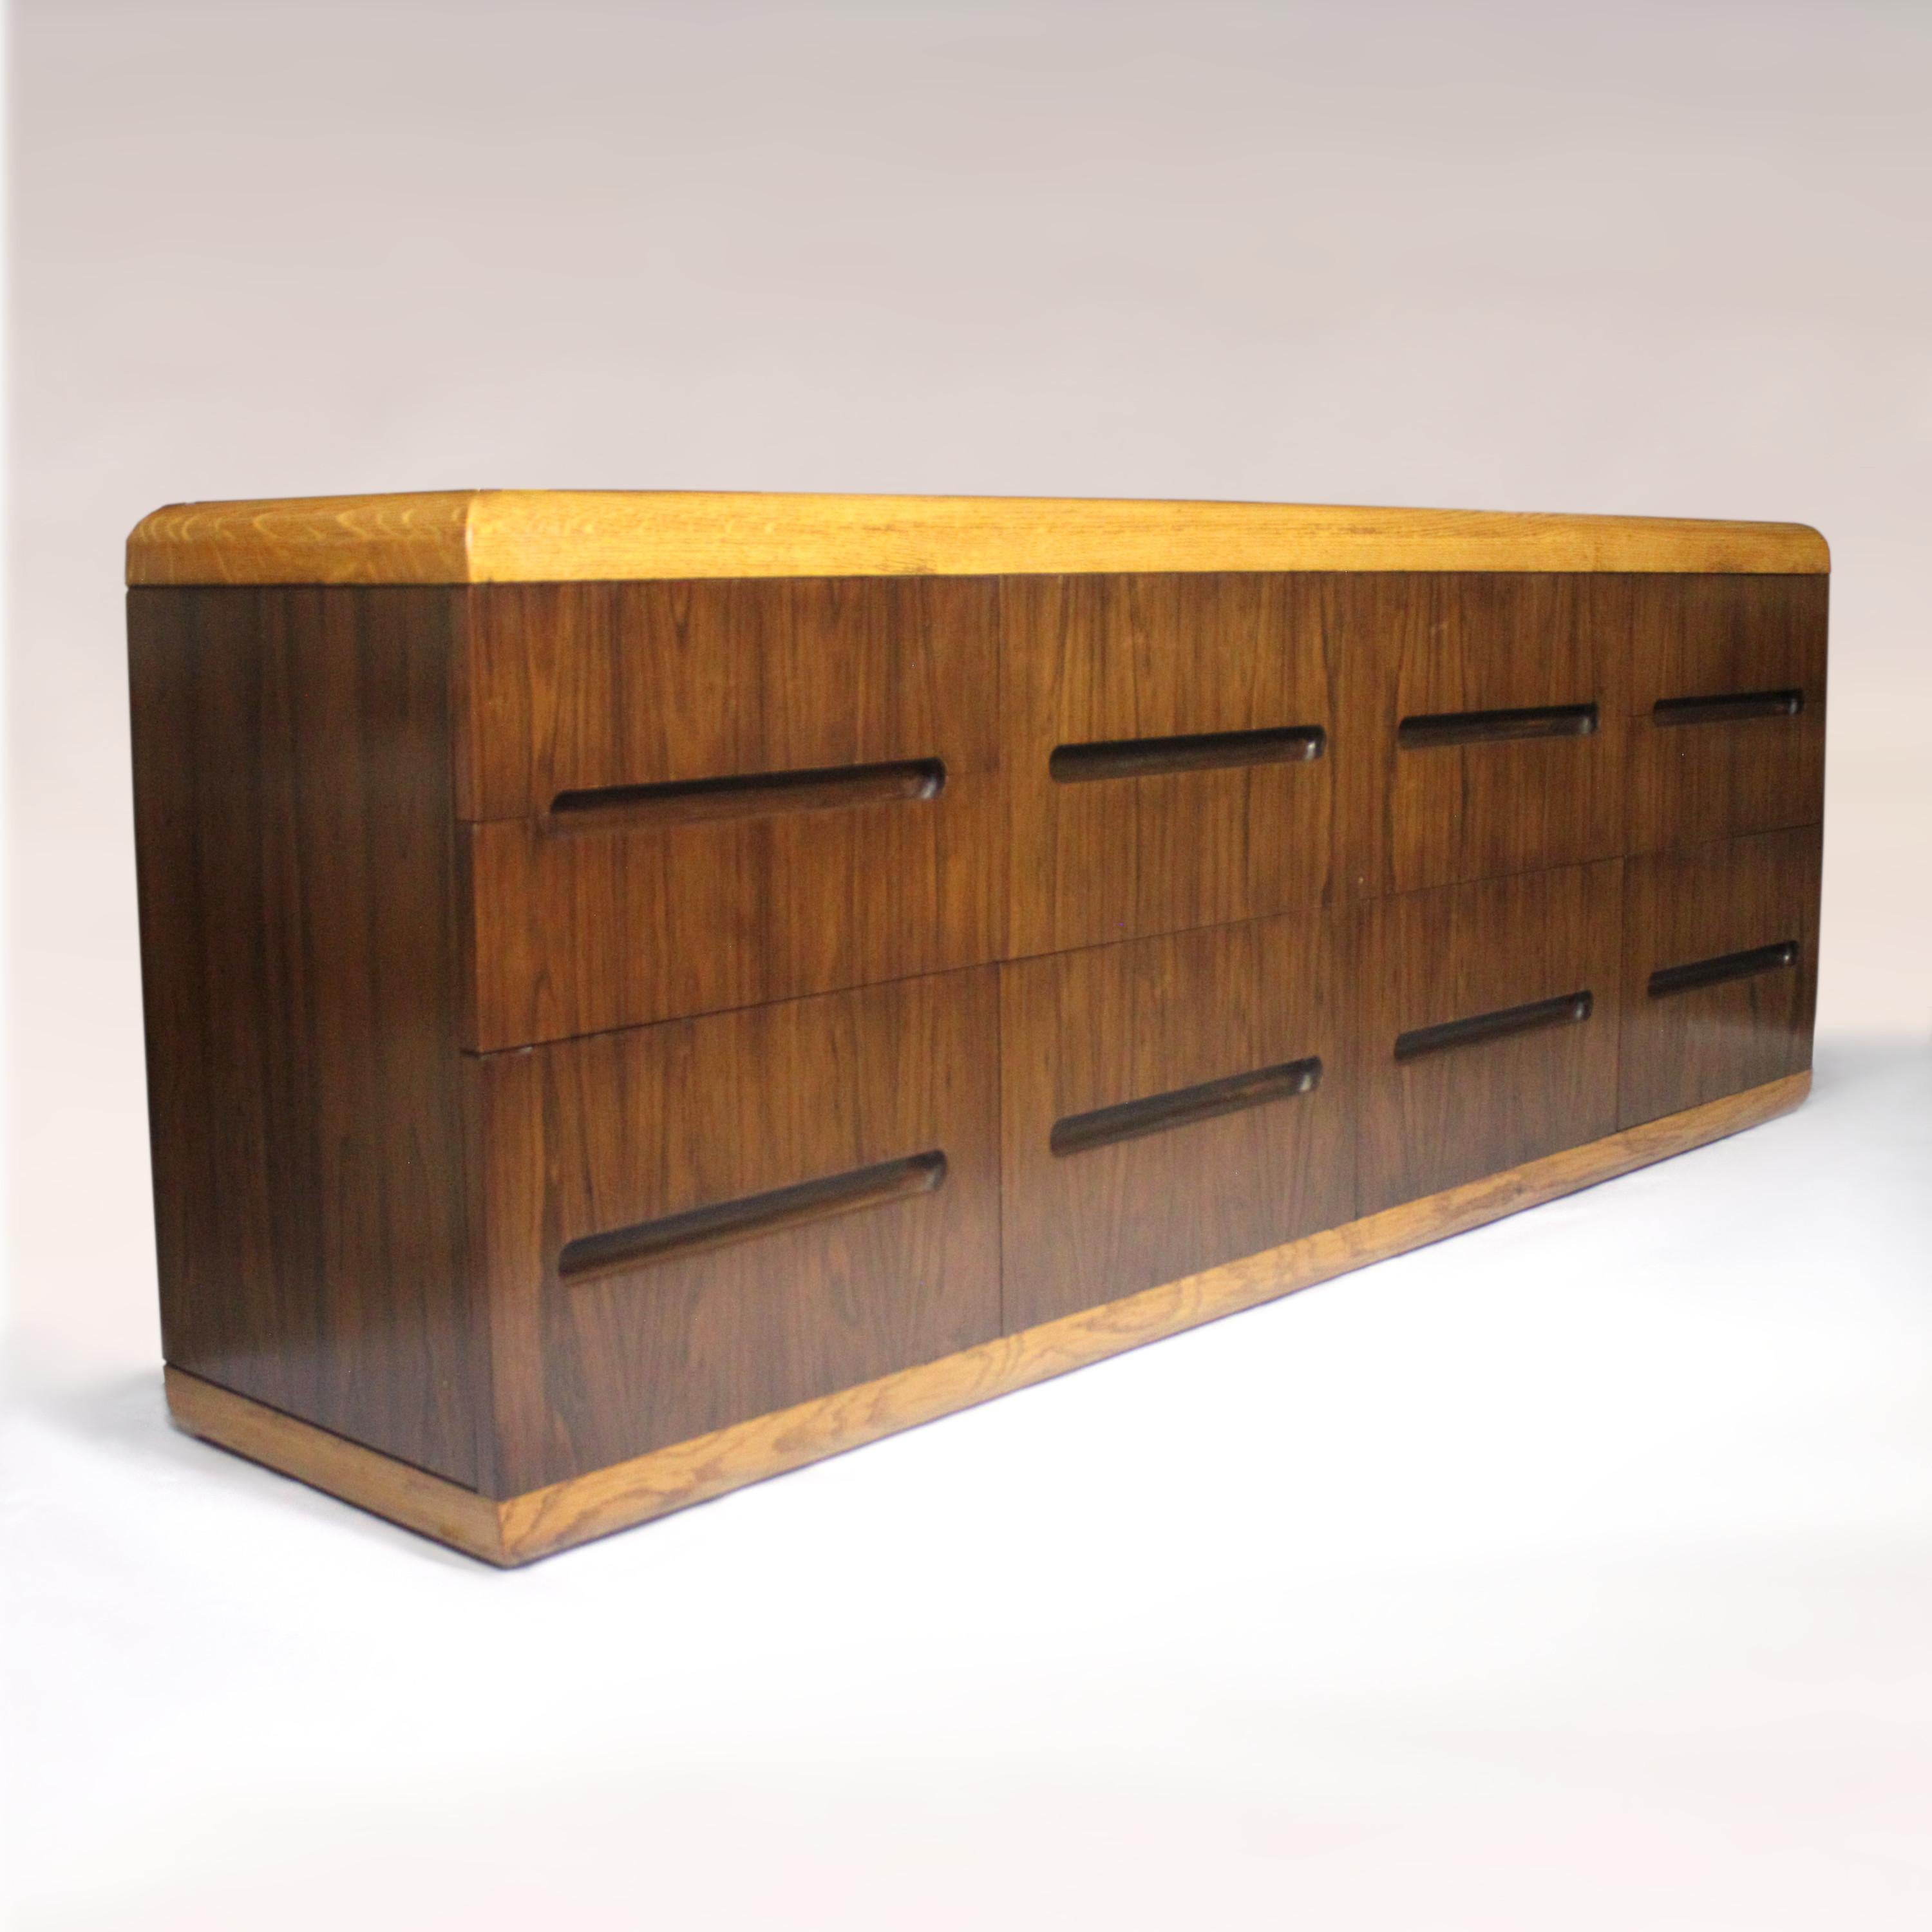 This beautifully-made credenza features a design reminiscent of Roger Sprunger  and the unparalleled build-quality for which Dunbar is renowned. The clean, Minimalist lines are complimented perfectly by the contrasting oak and rosewood veneers. With